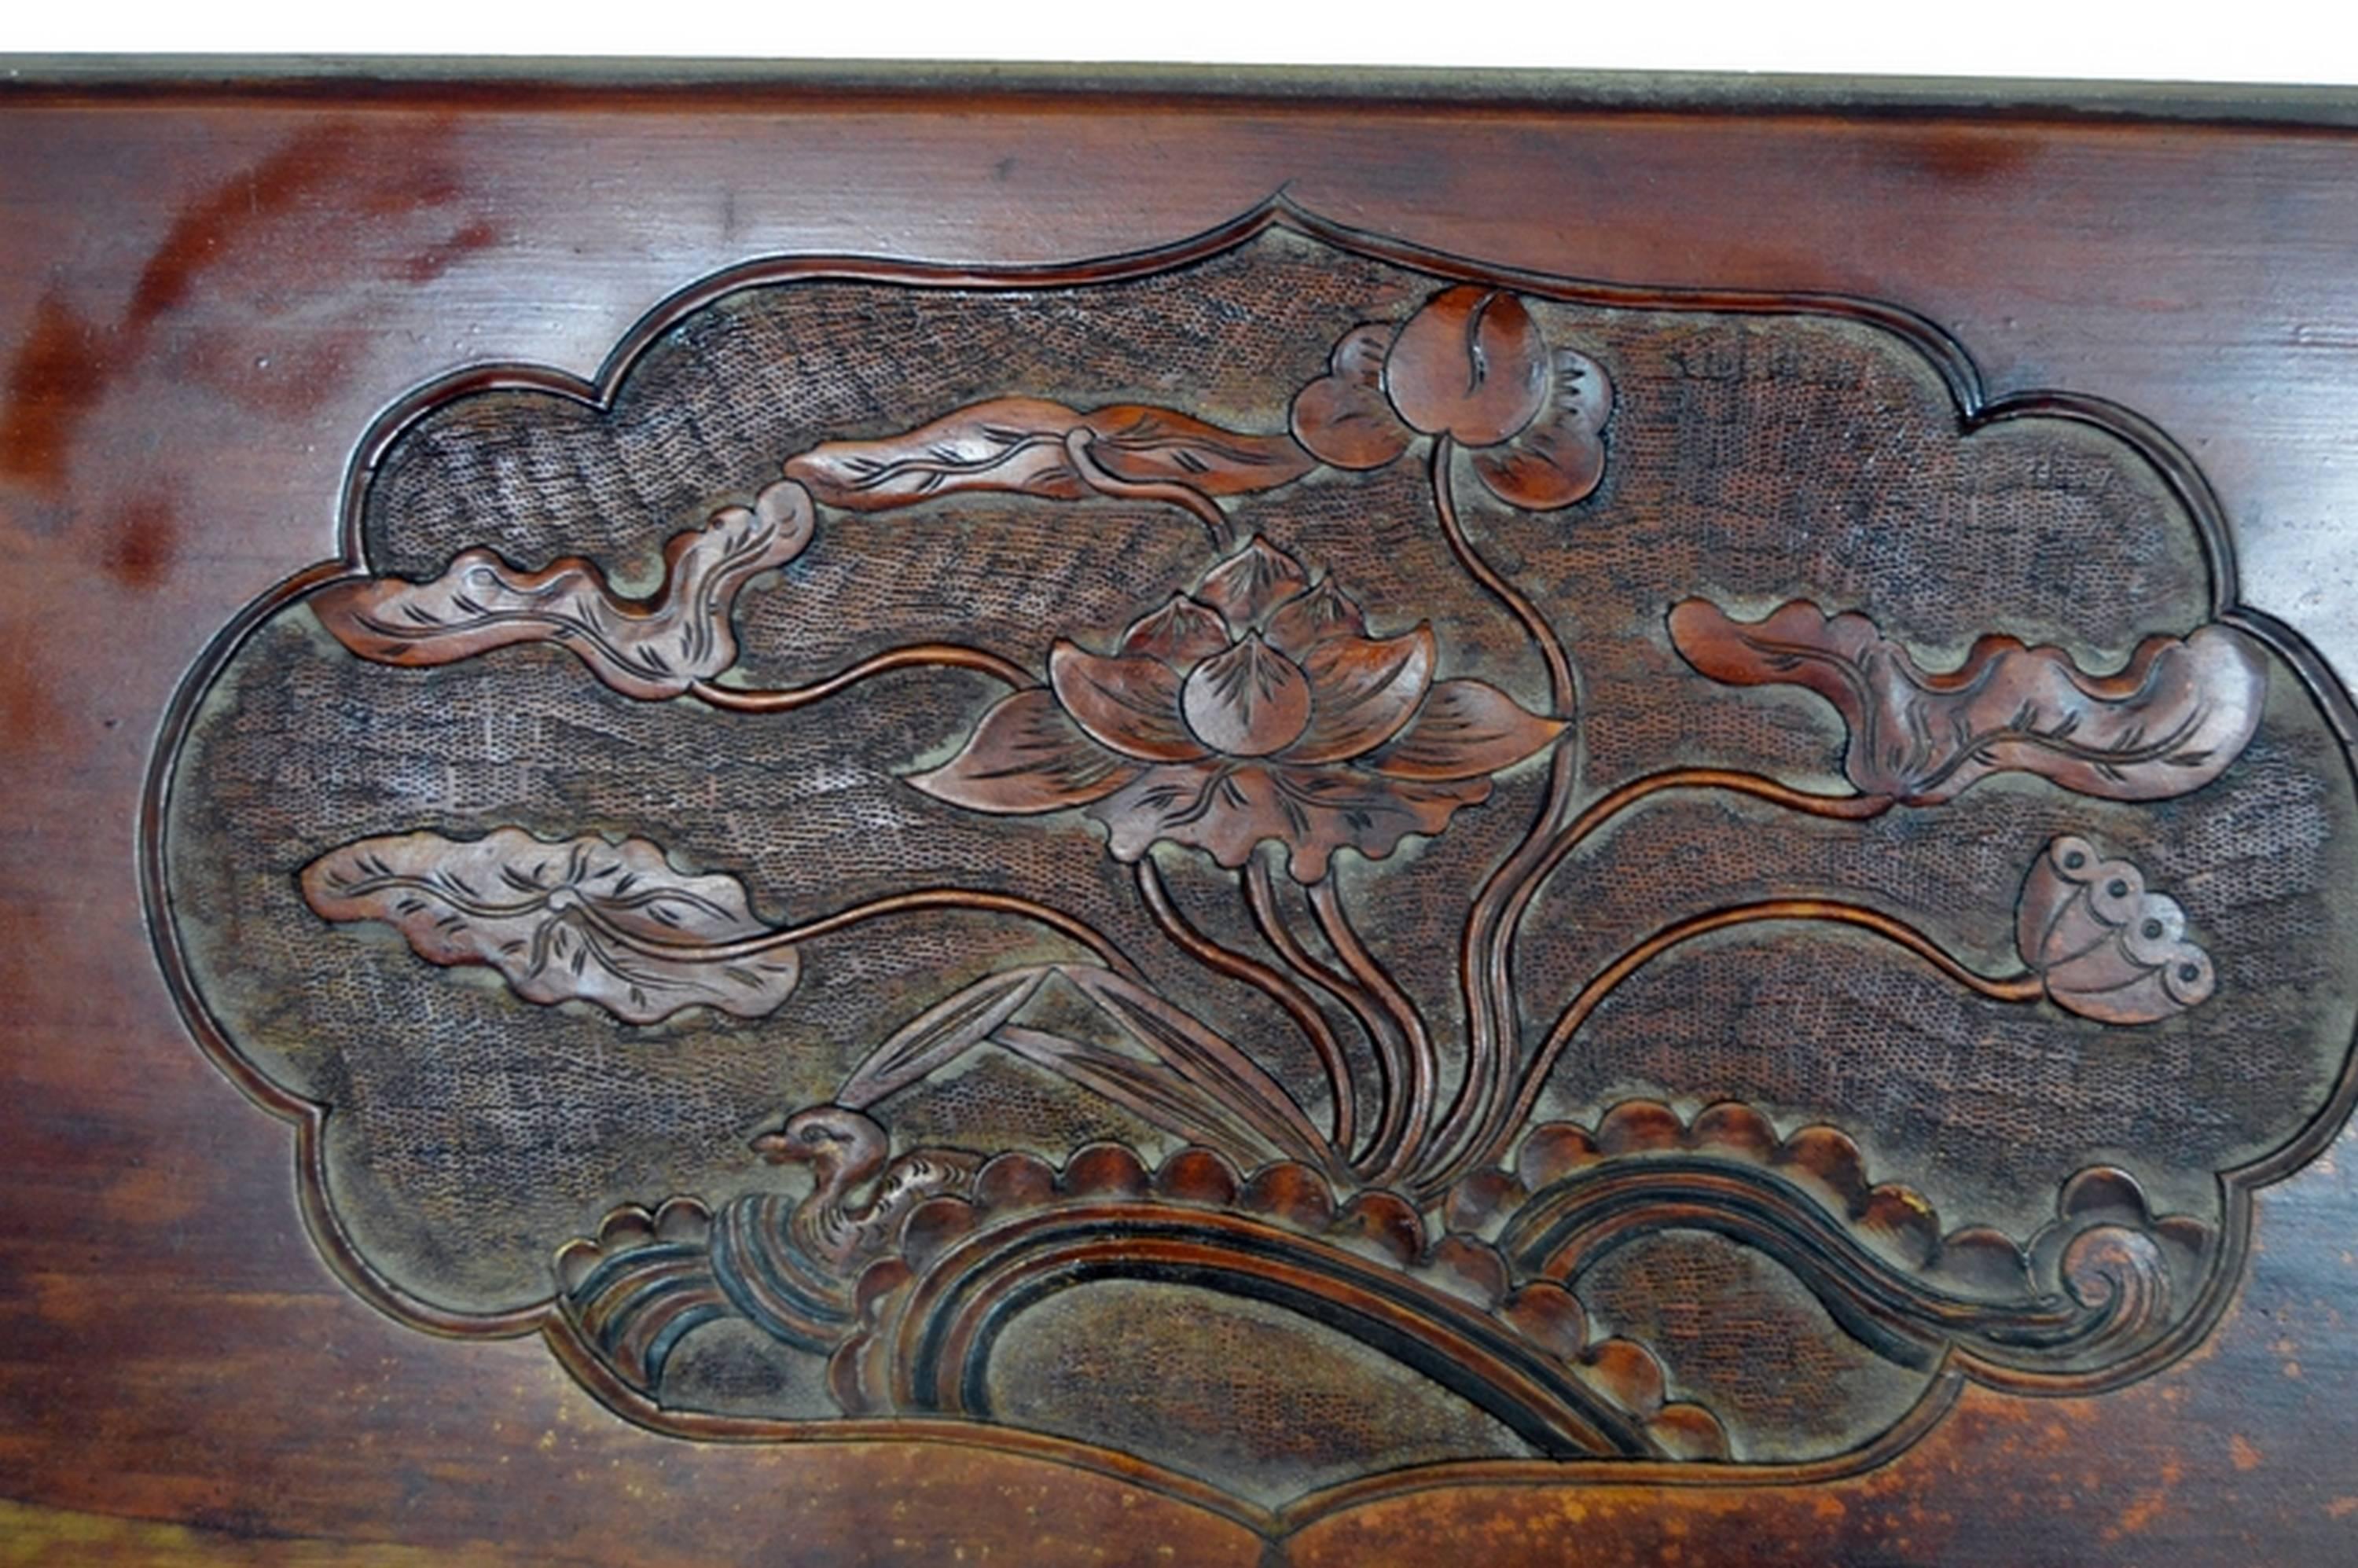 Antique Chinese hand-carved lacquered wooden wall plaque.